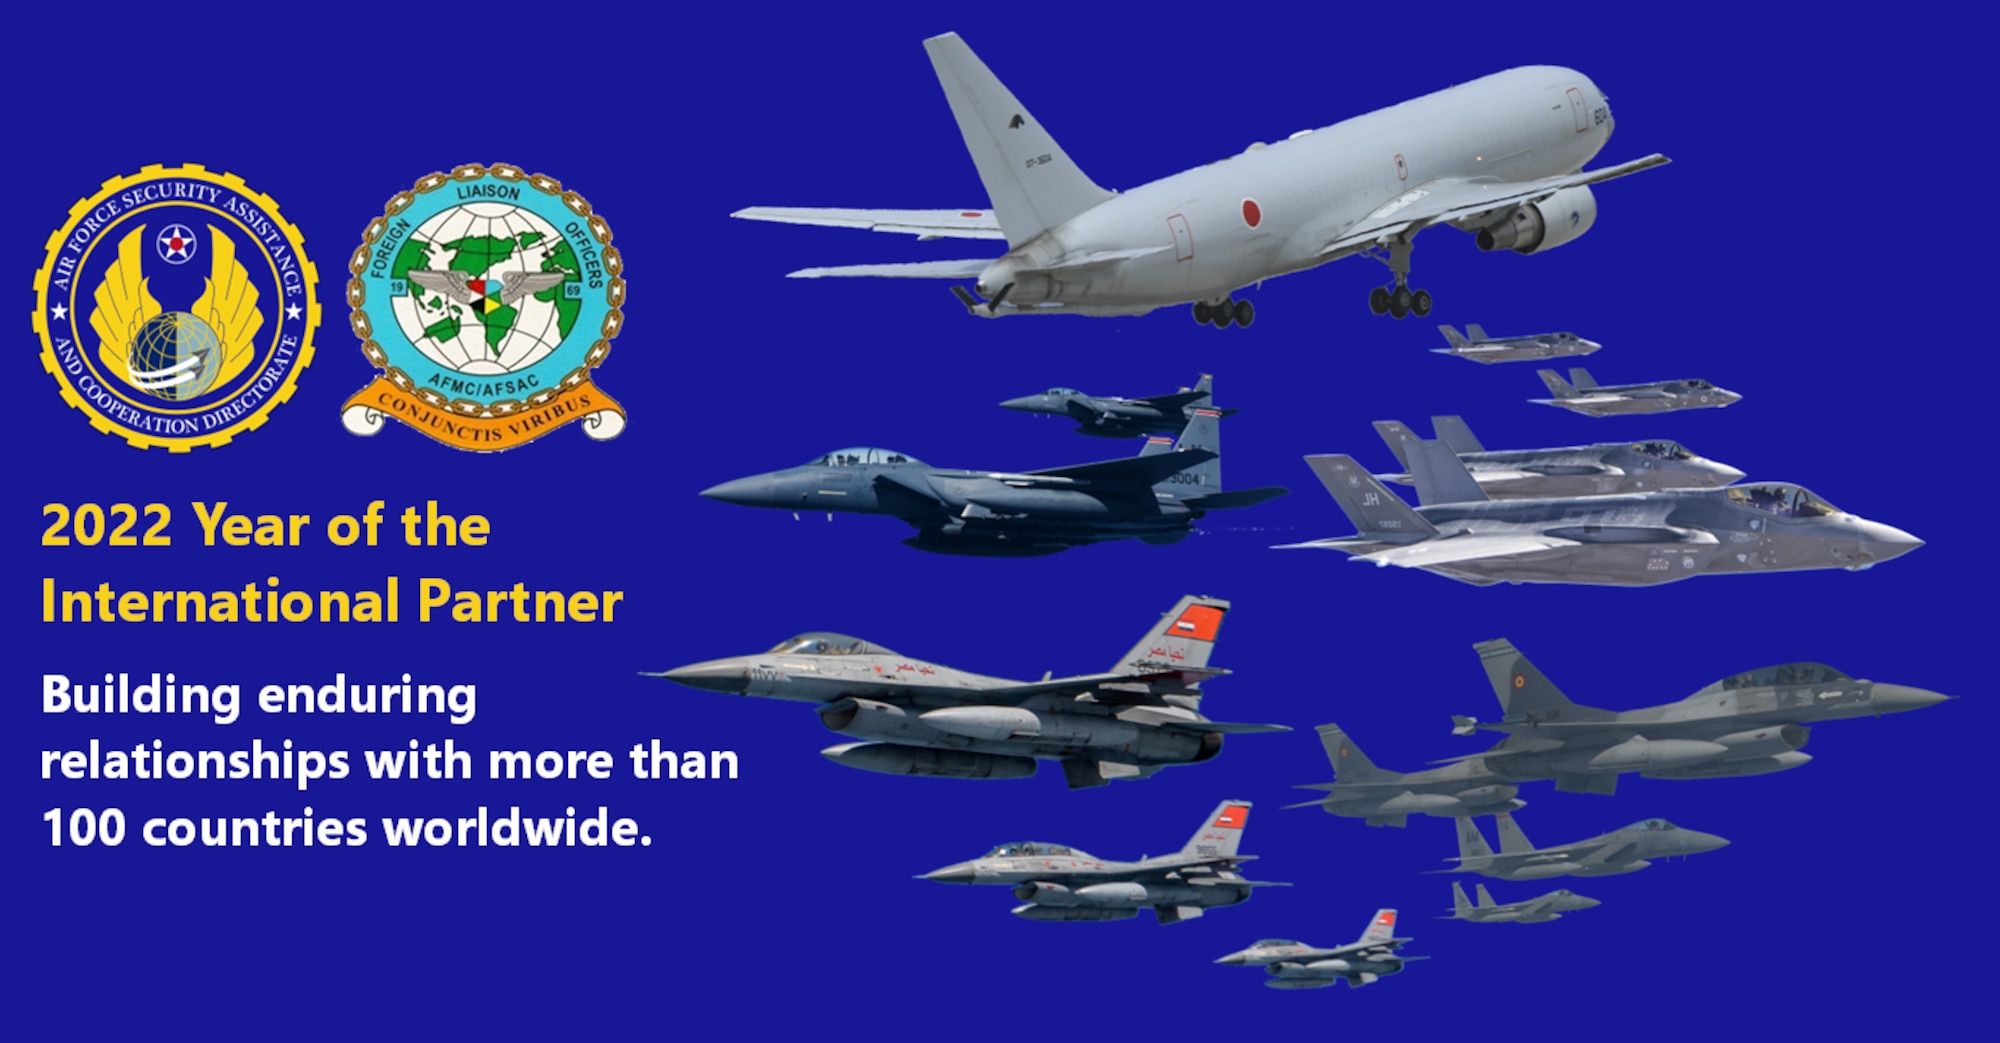 The Air Force Security Assistance and Cooperation Directorate (AFSAC) hosted a virtual event on February 17, 2022 with Foreign Liaison Officers (FLOs) representing U.S. international partner nations around the world to formally announce the 2022 theme, ‘Year of the International Partner.’ (U.S. Air Force graphic by Jonathan Tharp)